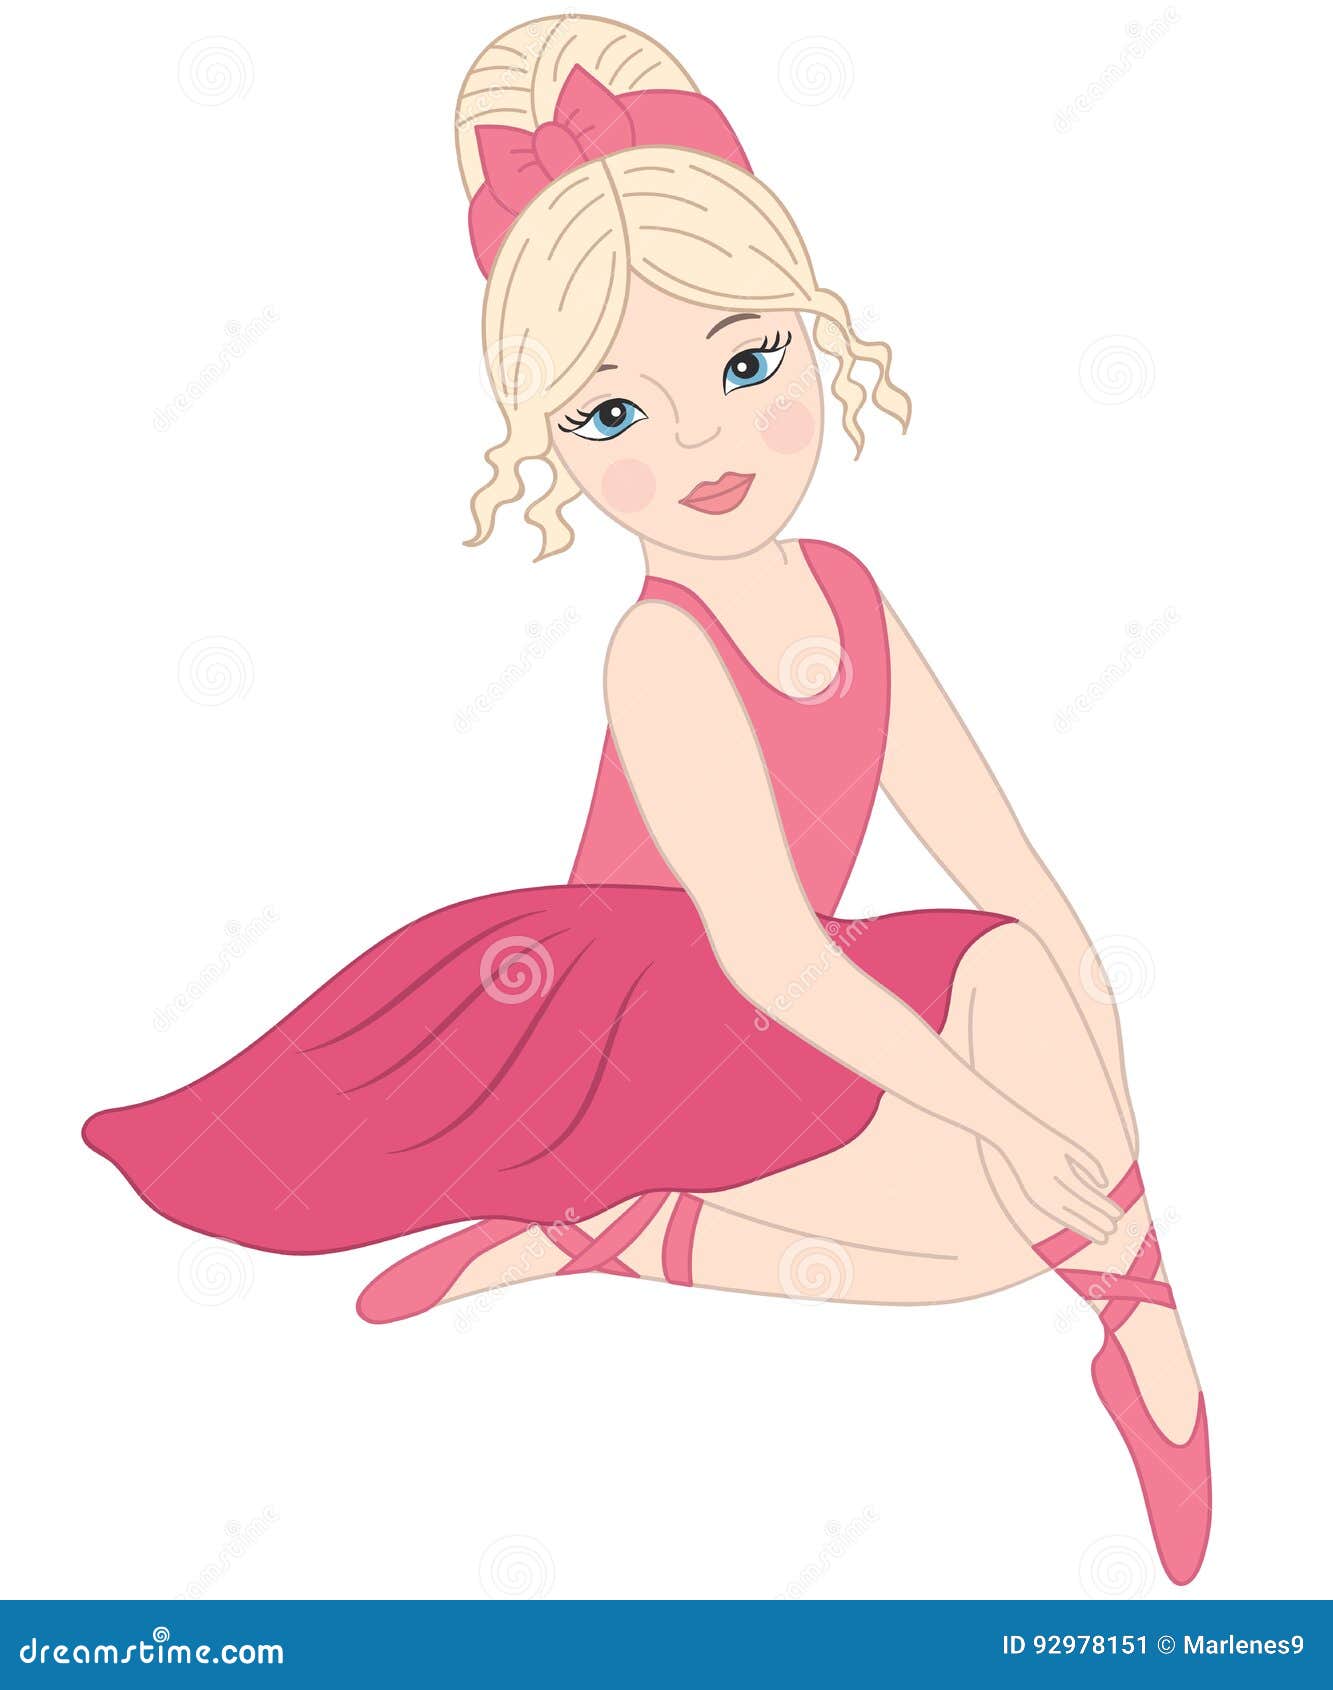 Clipart Dancing Stock Illustrations – 6,103 Clipart Dancing Stock  Illustrations, Vectors & Clipart - Dreamstime